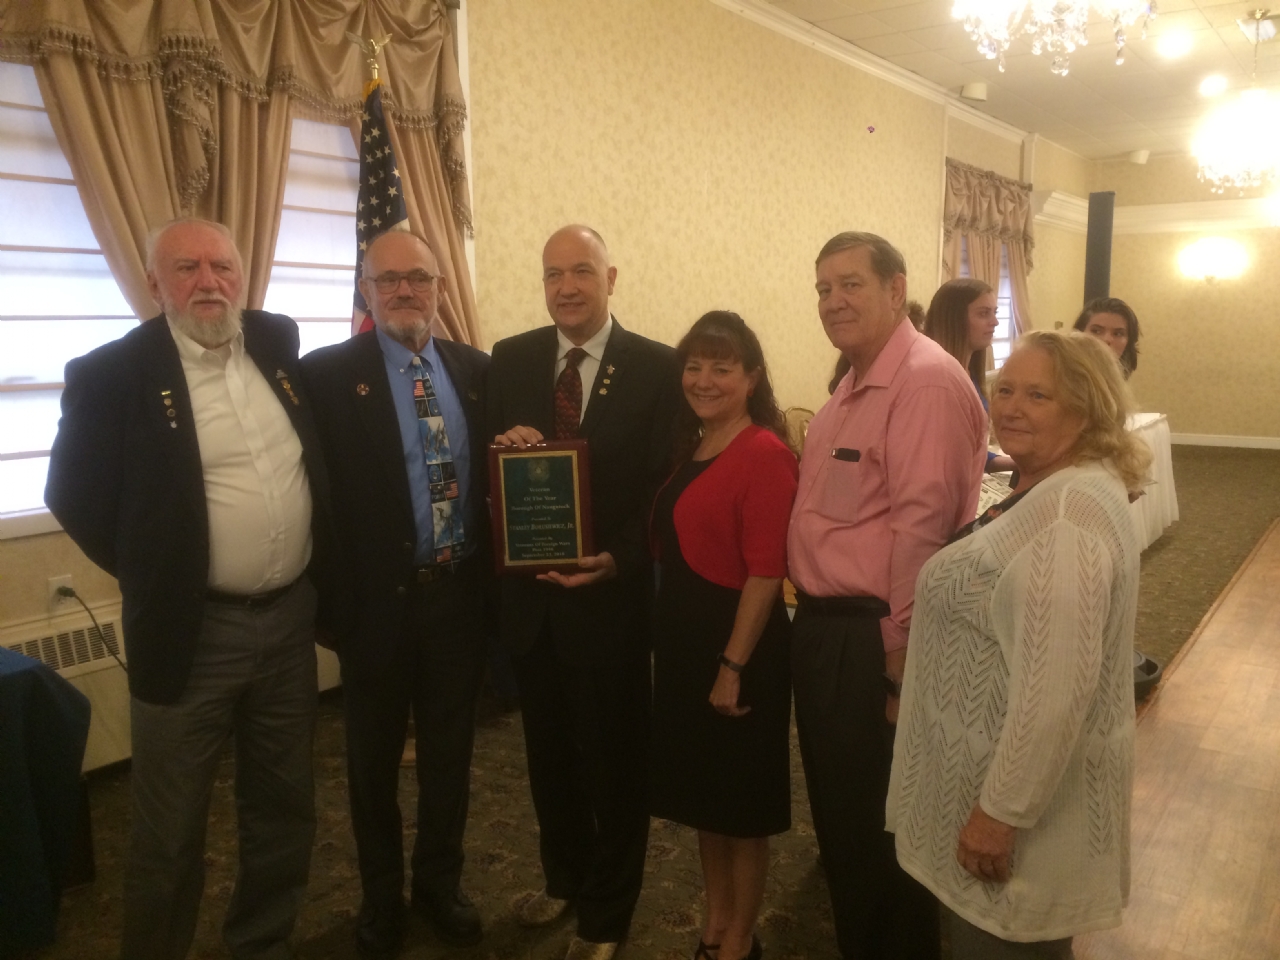 Mel, Ruth, Ann ,Stan , Jim and Skip, 9/23/2018 award ceremony at the Chrystal room Honoring Stan as Veteran of the year, put on by post 1964 Naugatuck